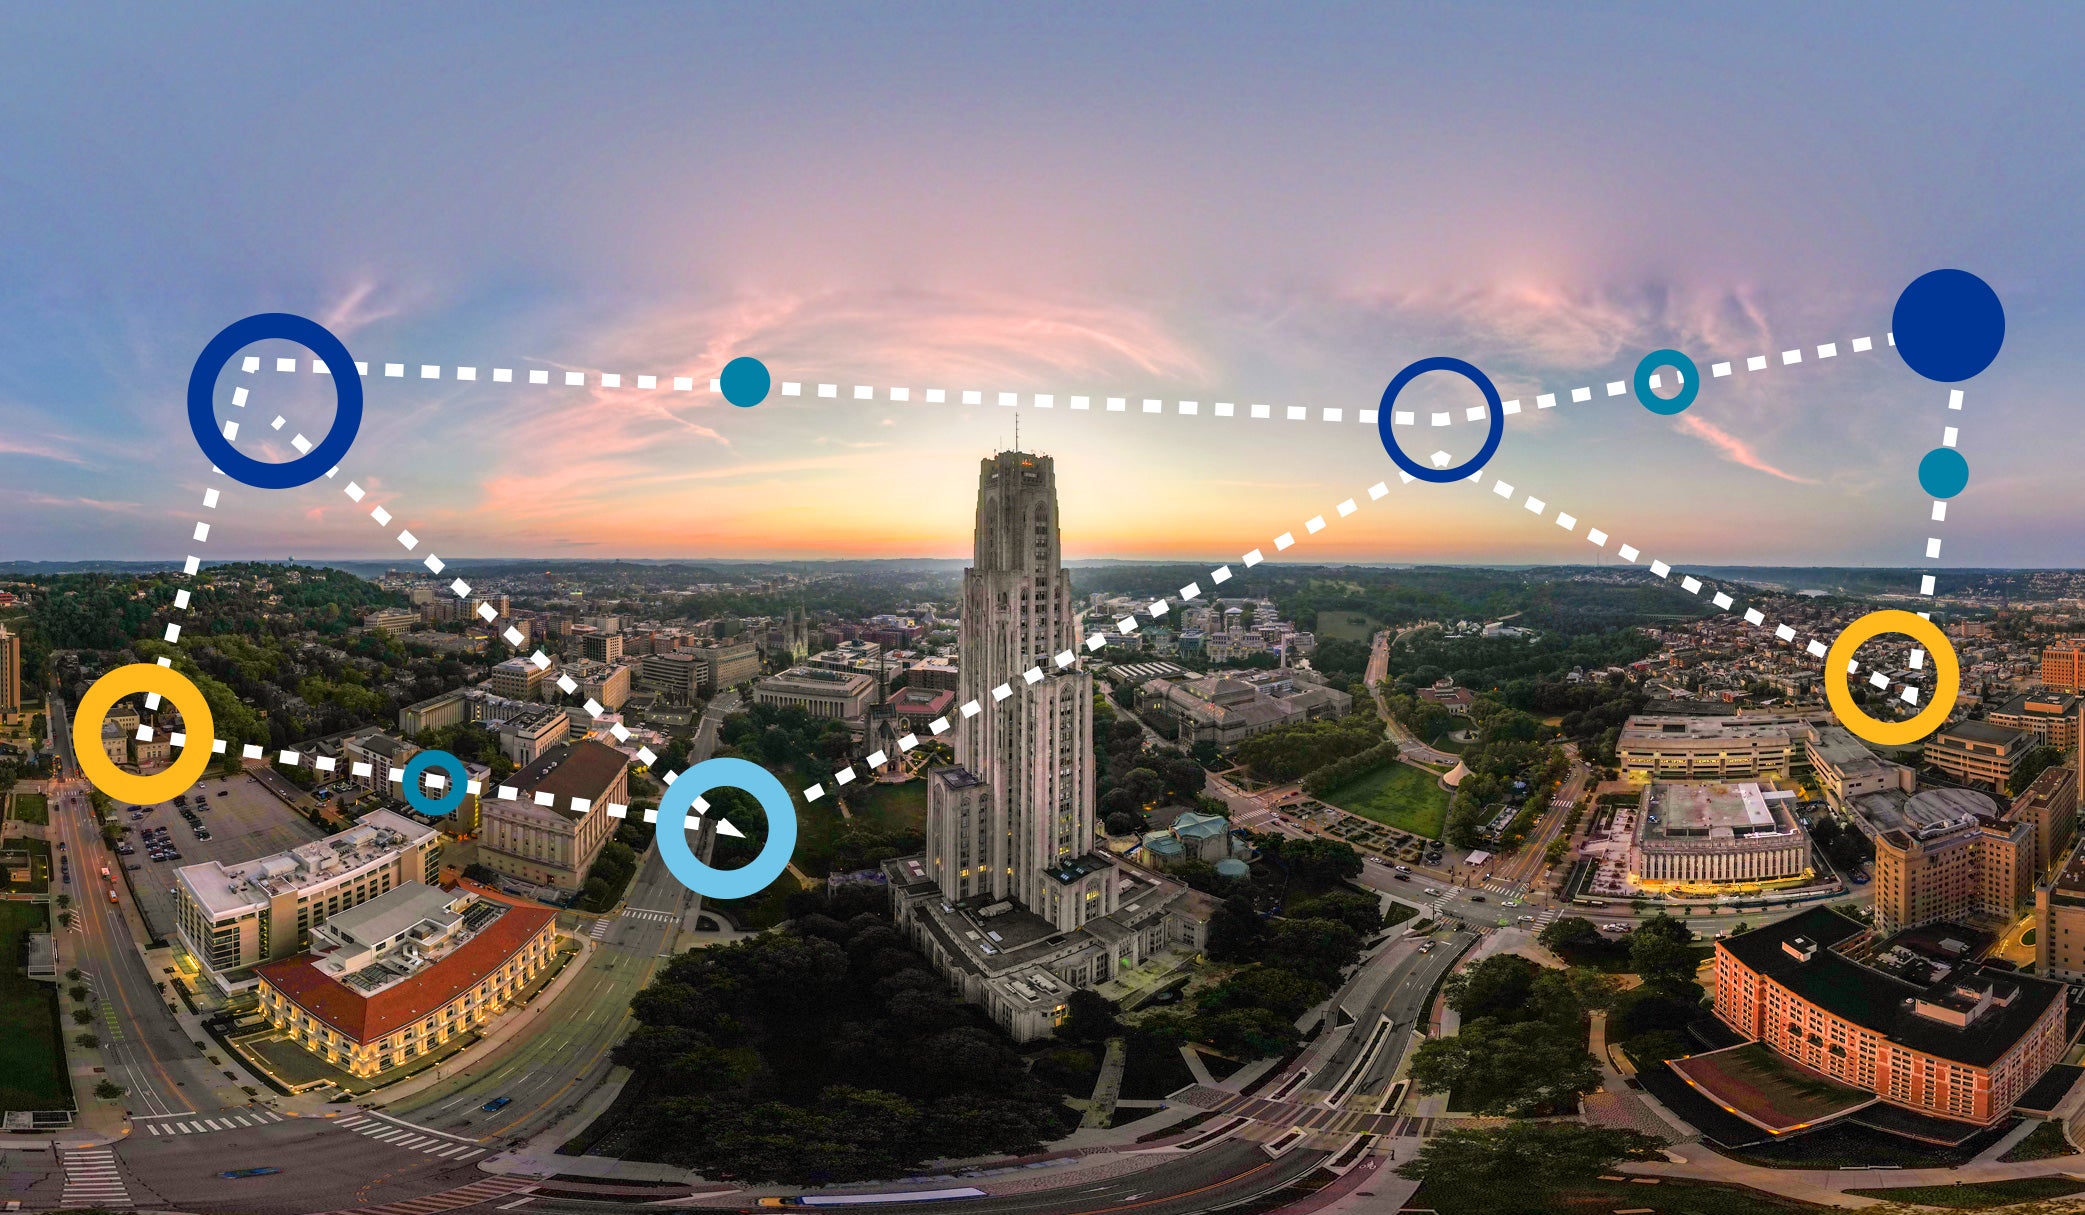 The Pitt Research Navigator connects researchers at the University of Pittsburgh to the resources for conducting large, interdisciplinary research projects.